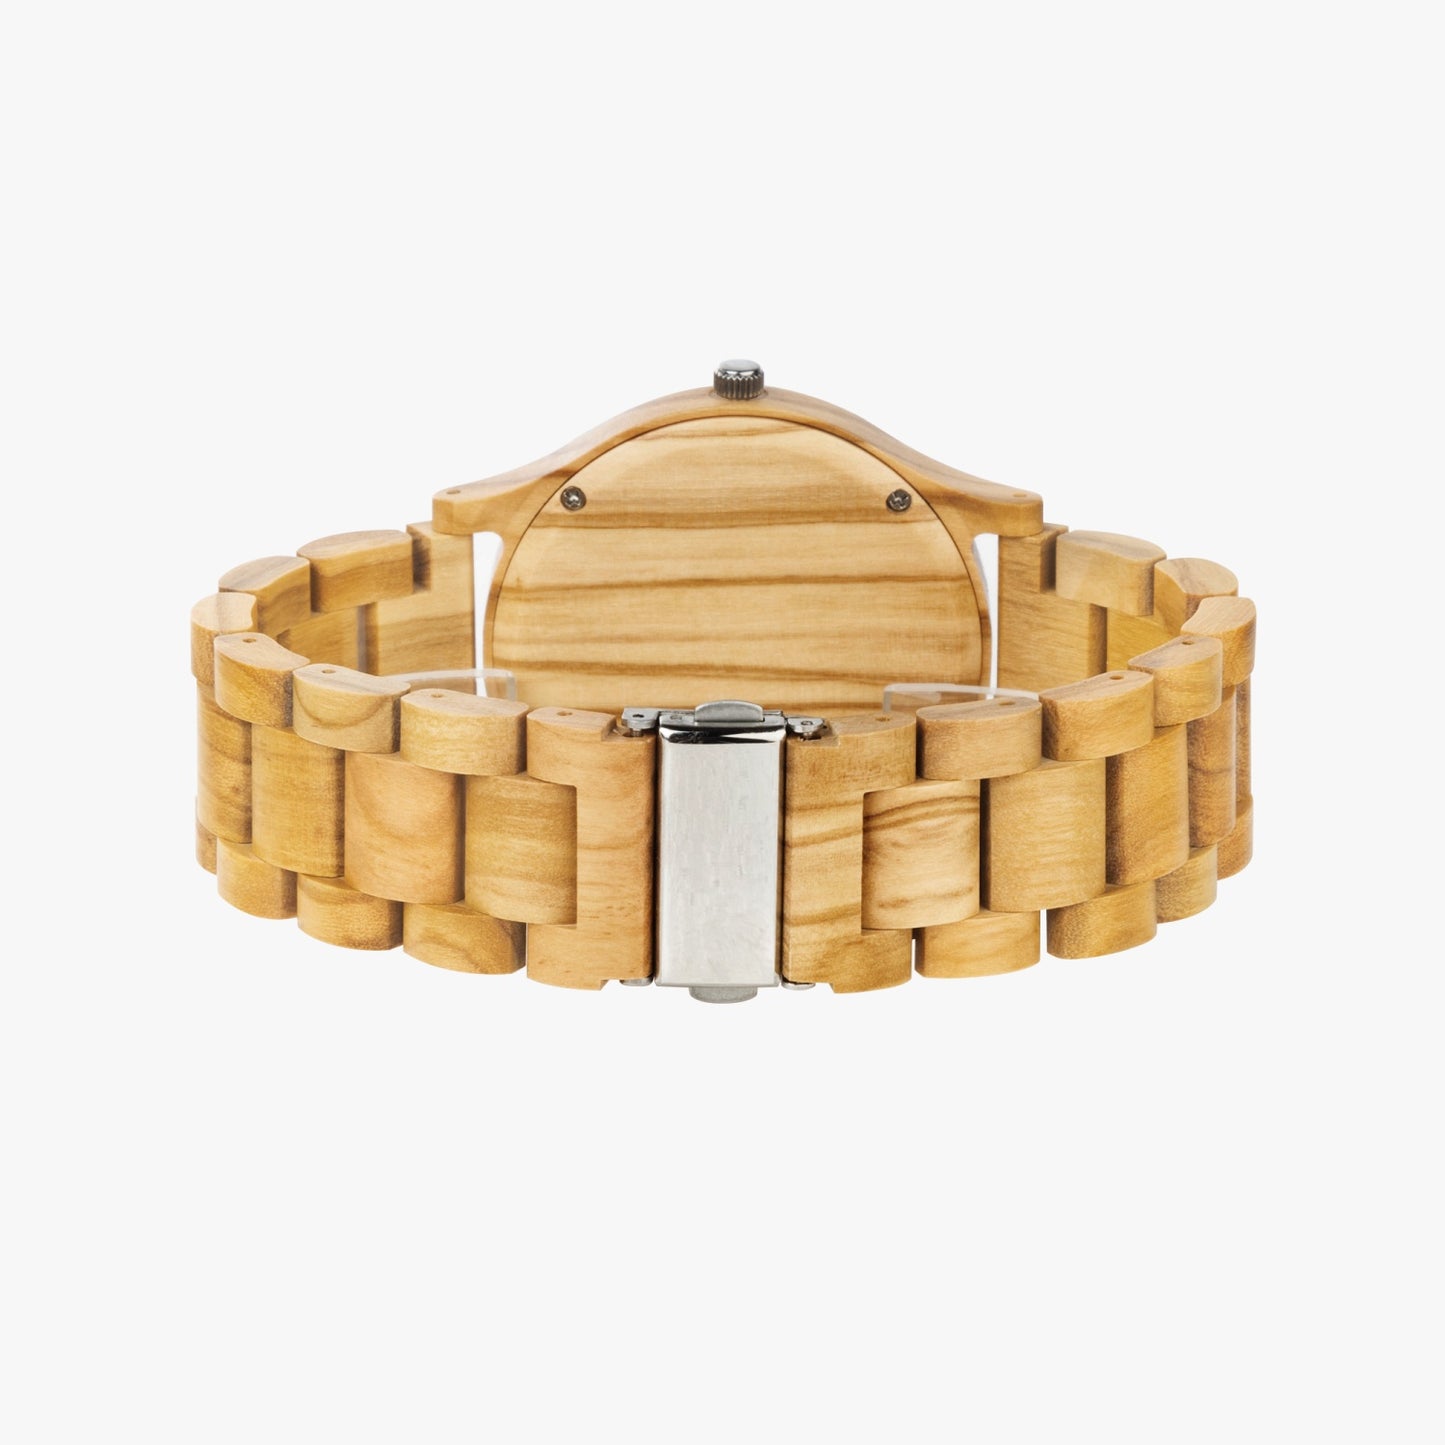 Natural wood watch "Toujoudoré"